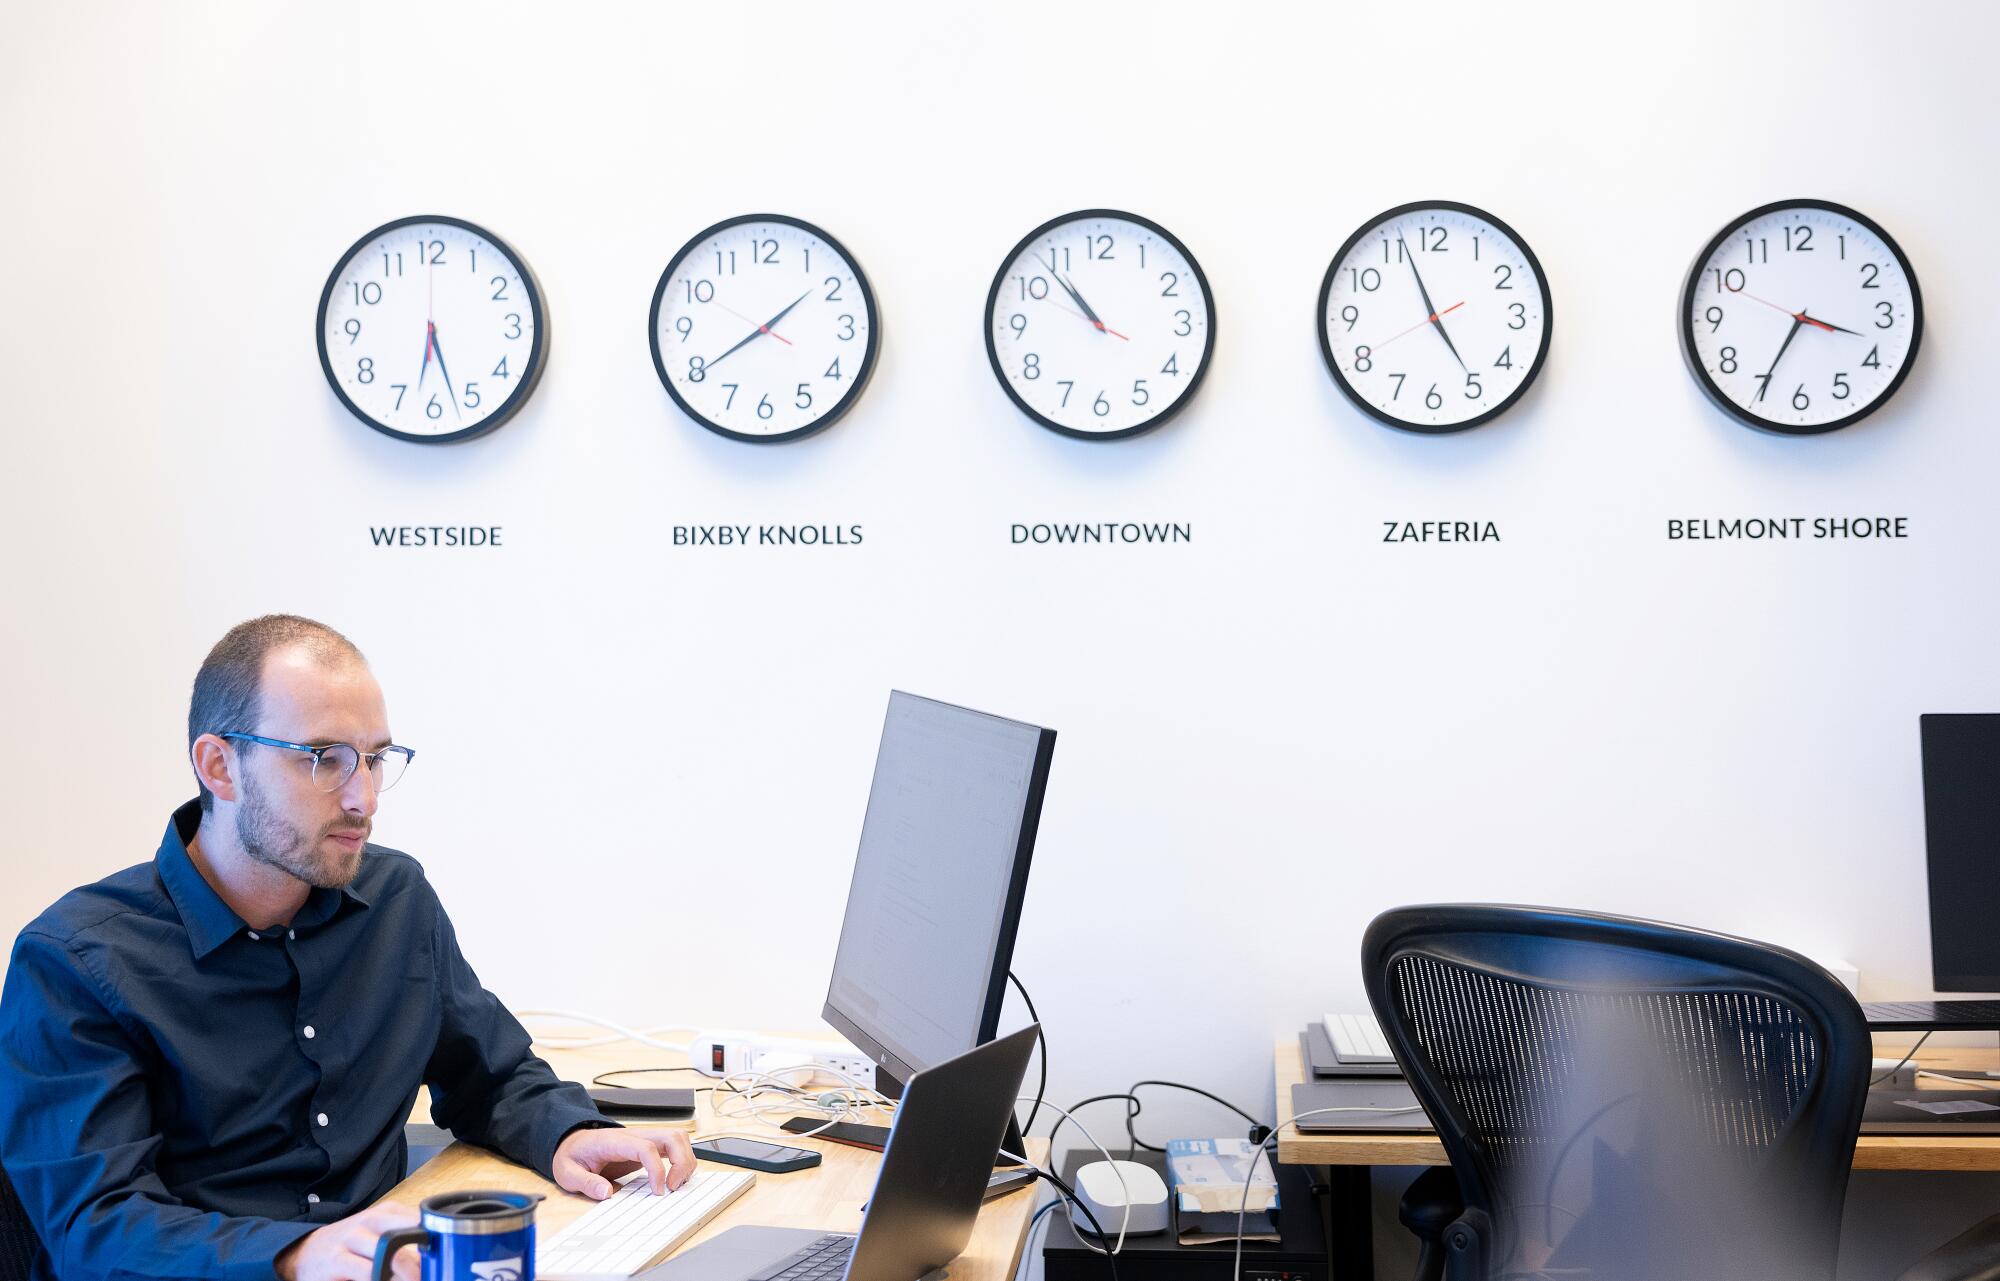 A man types on a keyboard along a wall lined by clocks